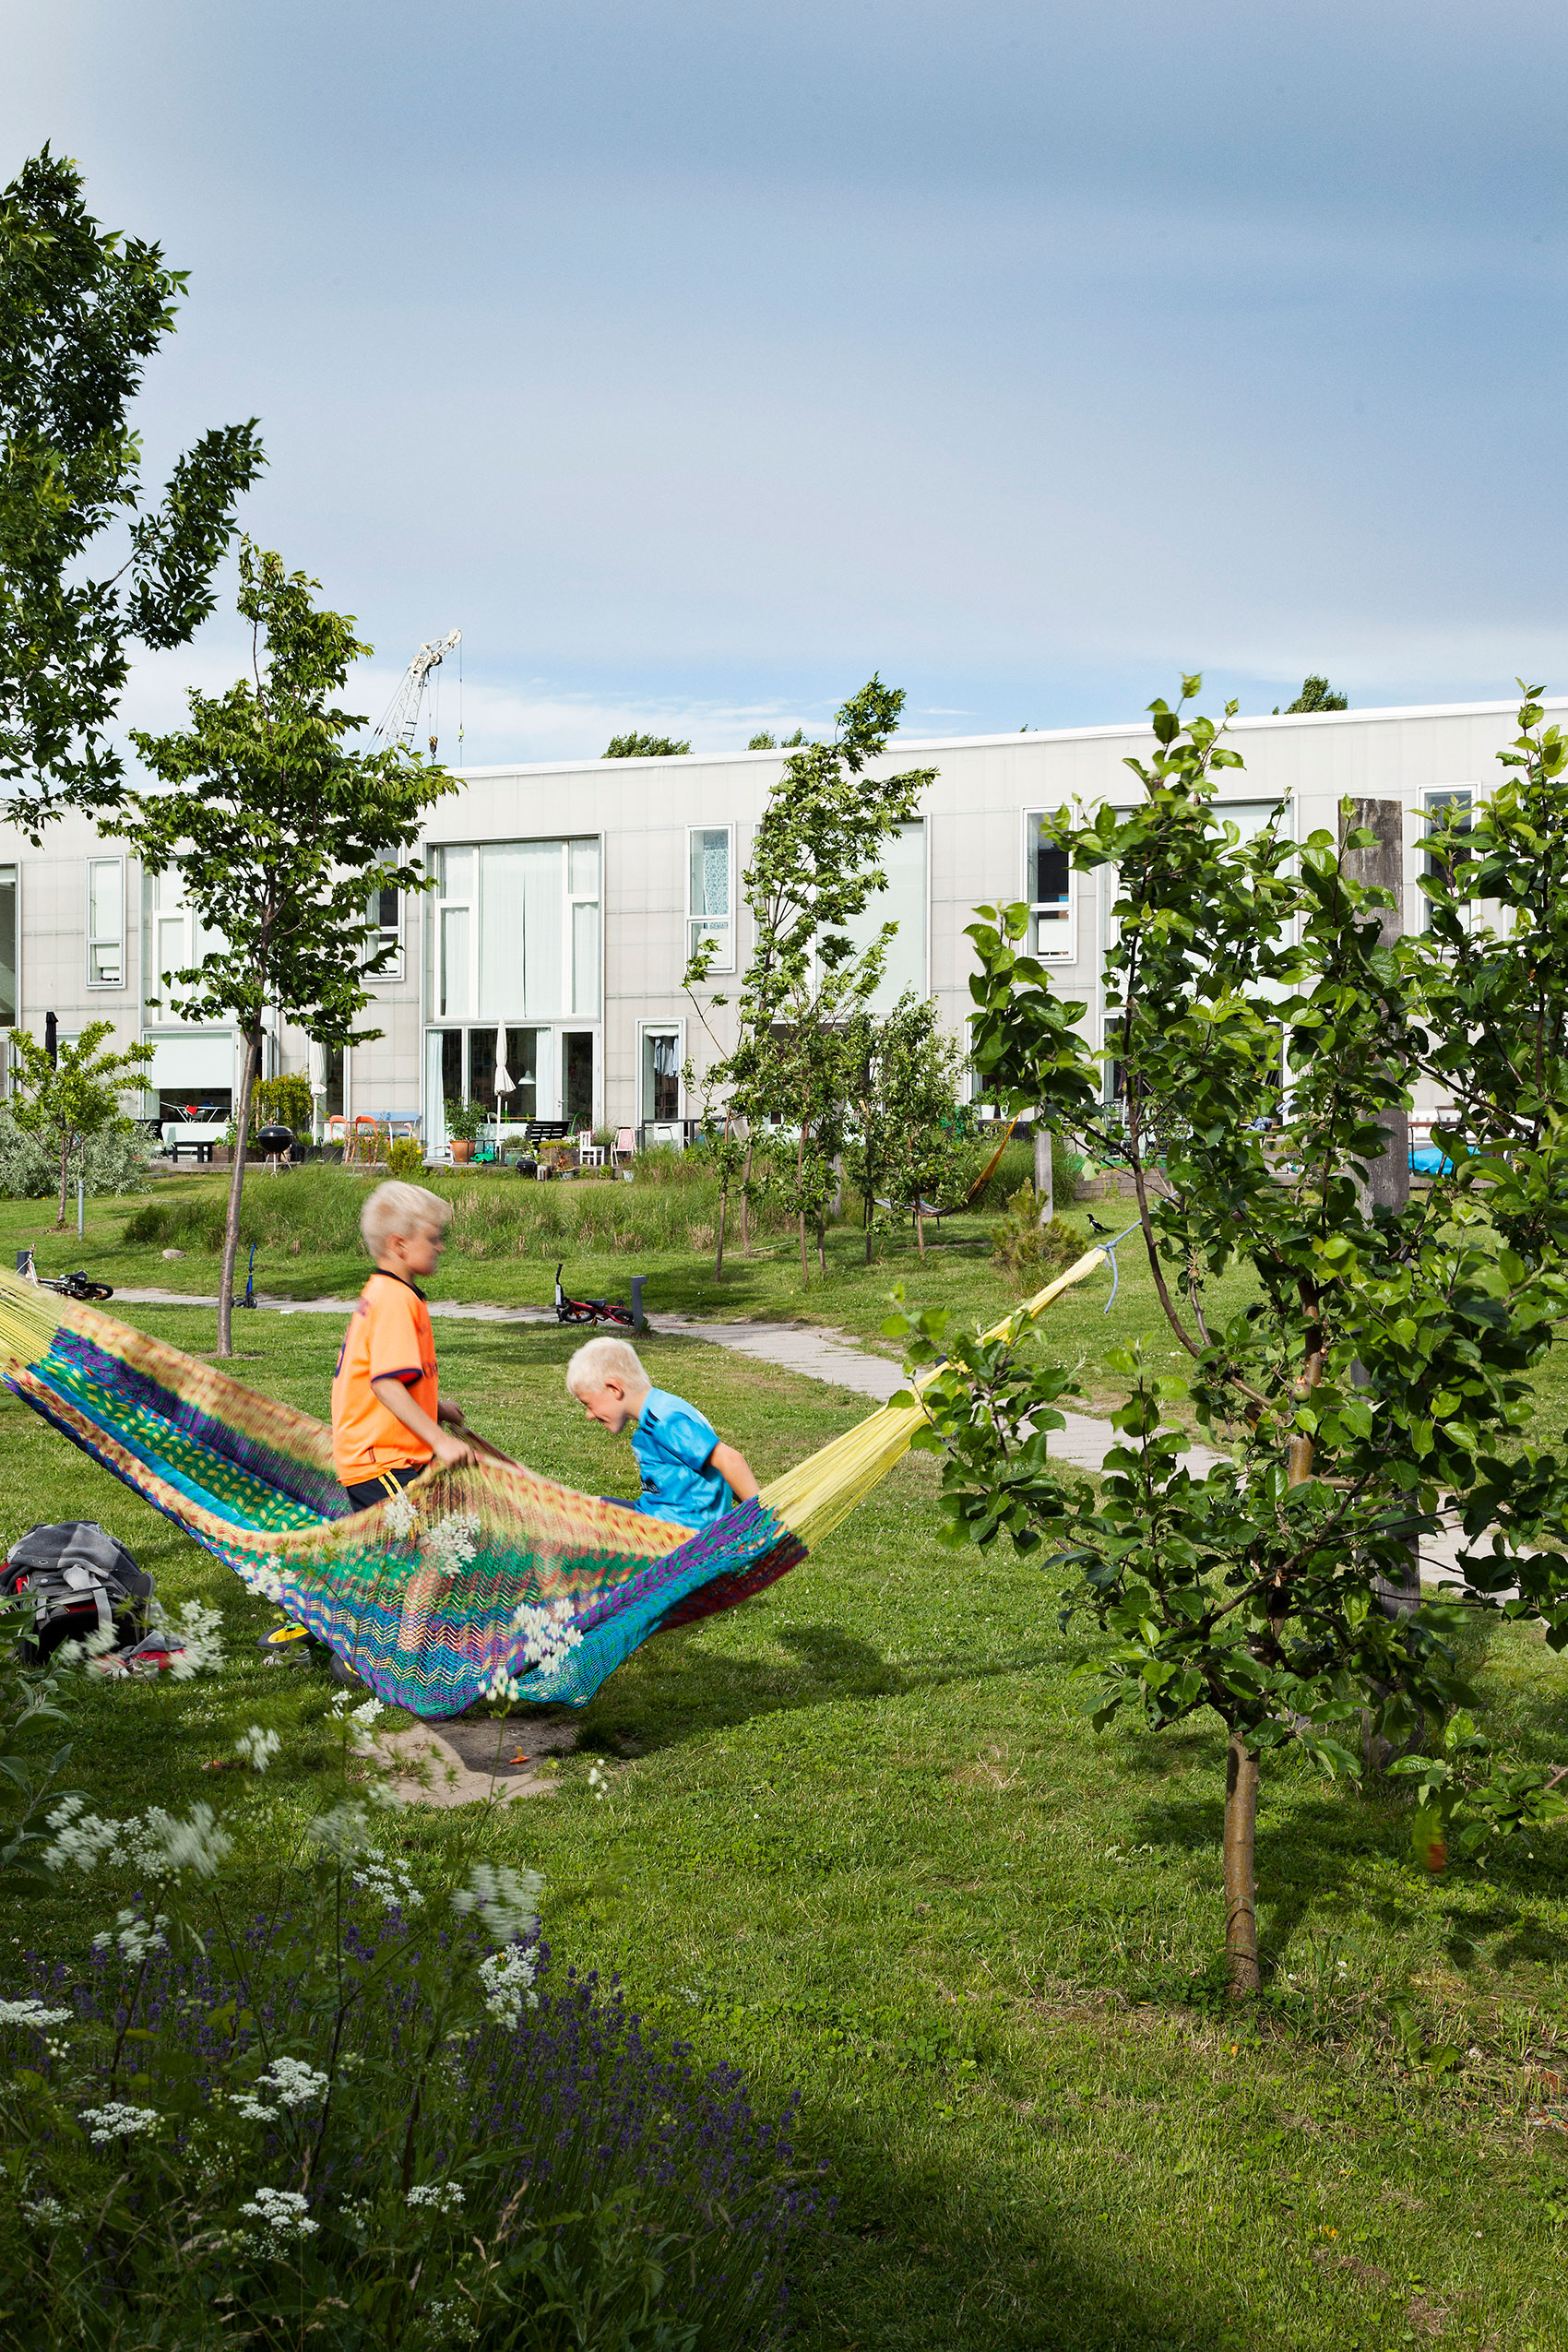 Lang Eng, Copenhagen. Designed by the architect Dorte Mandrup, this co-housing community includes a shared garden, a 20-seat cinema for collective film and TV watching and an industrial-sized kitchen where residents take turns to prepare shared meals.